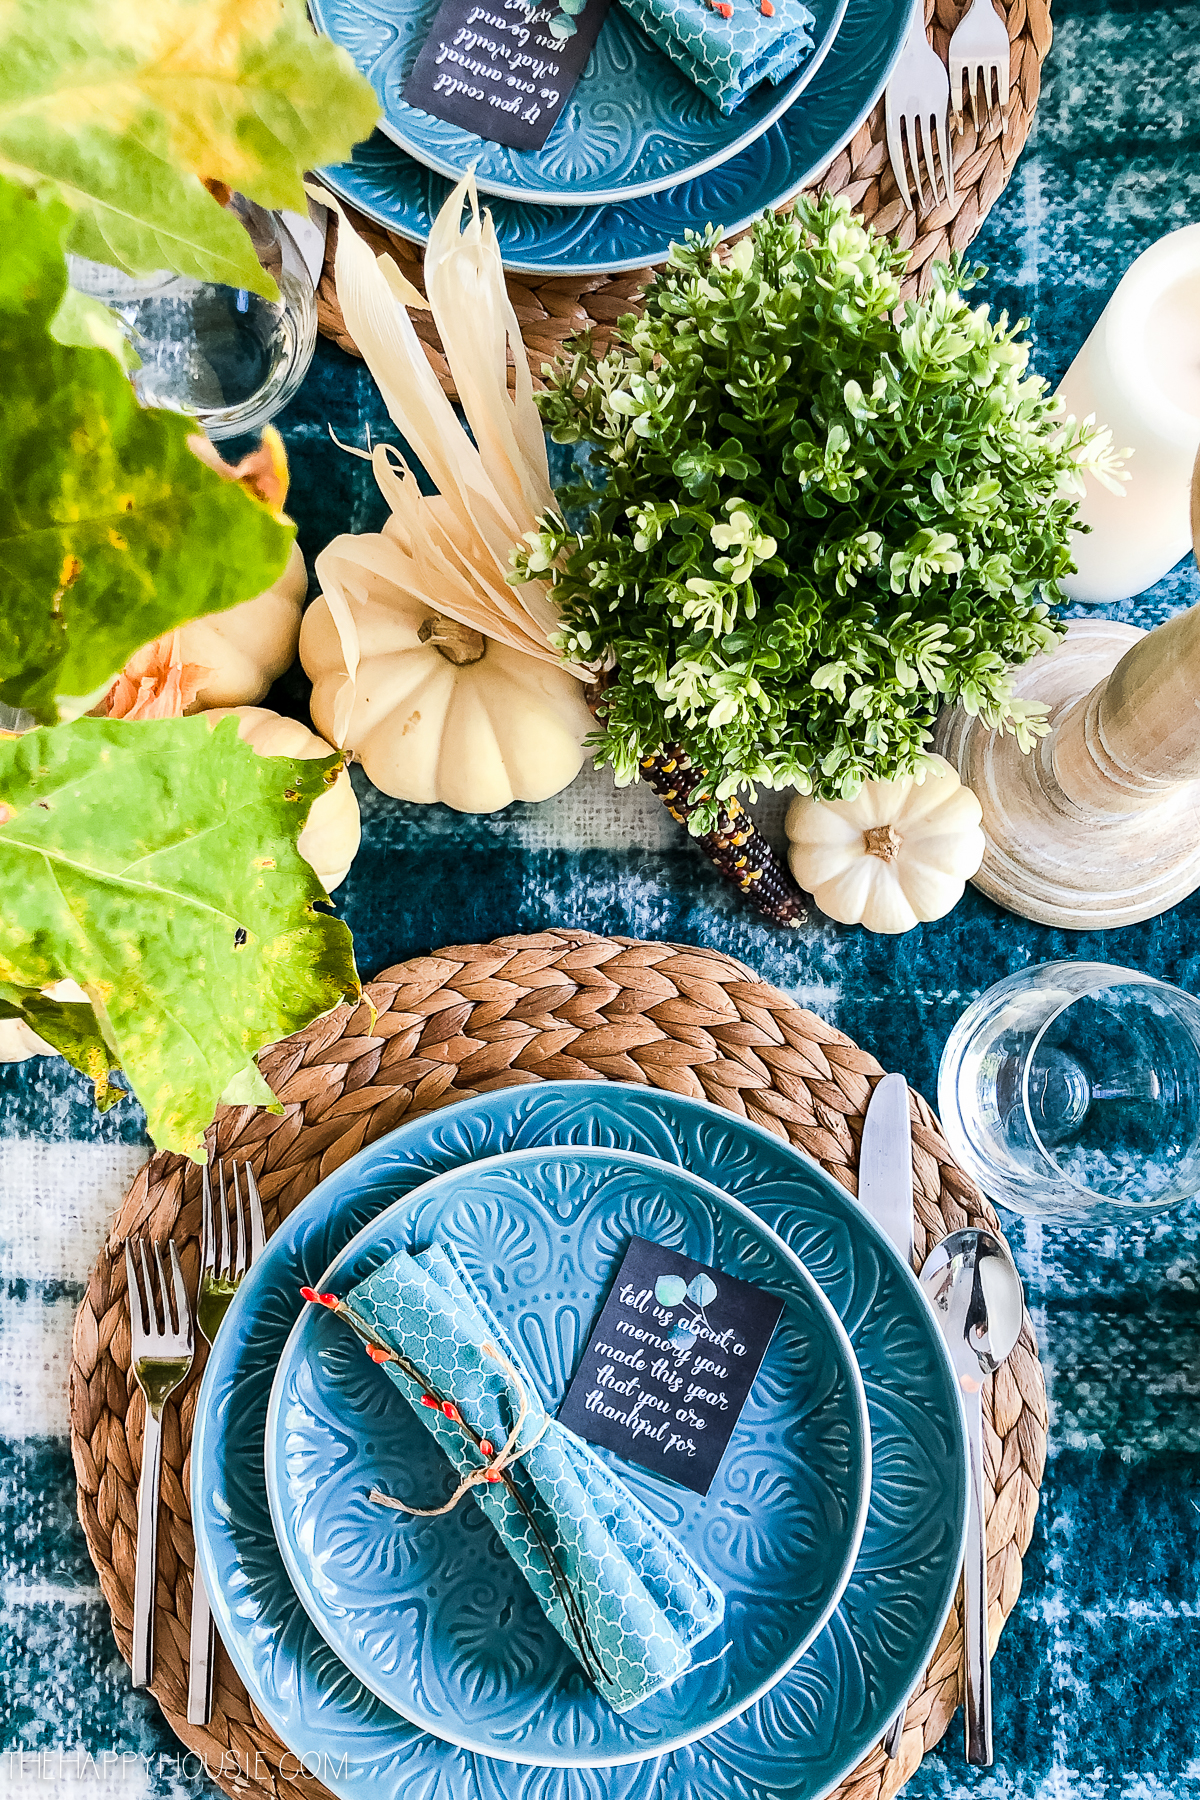 Blue plates on a woven placemat.